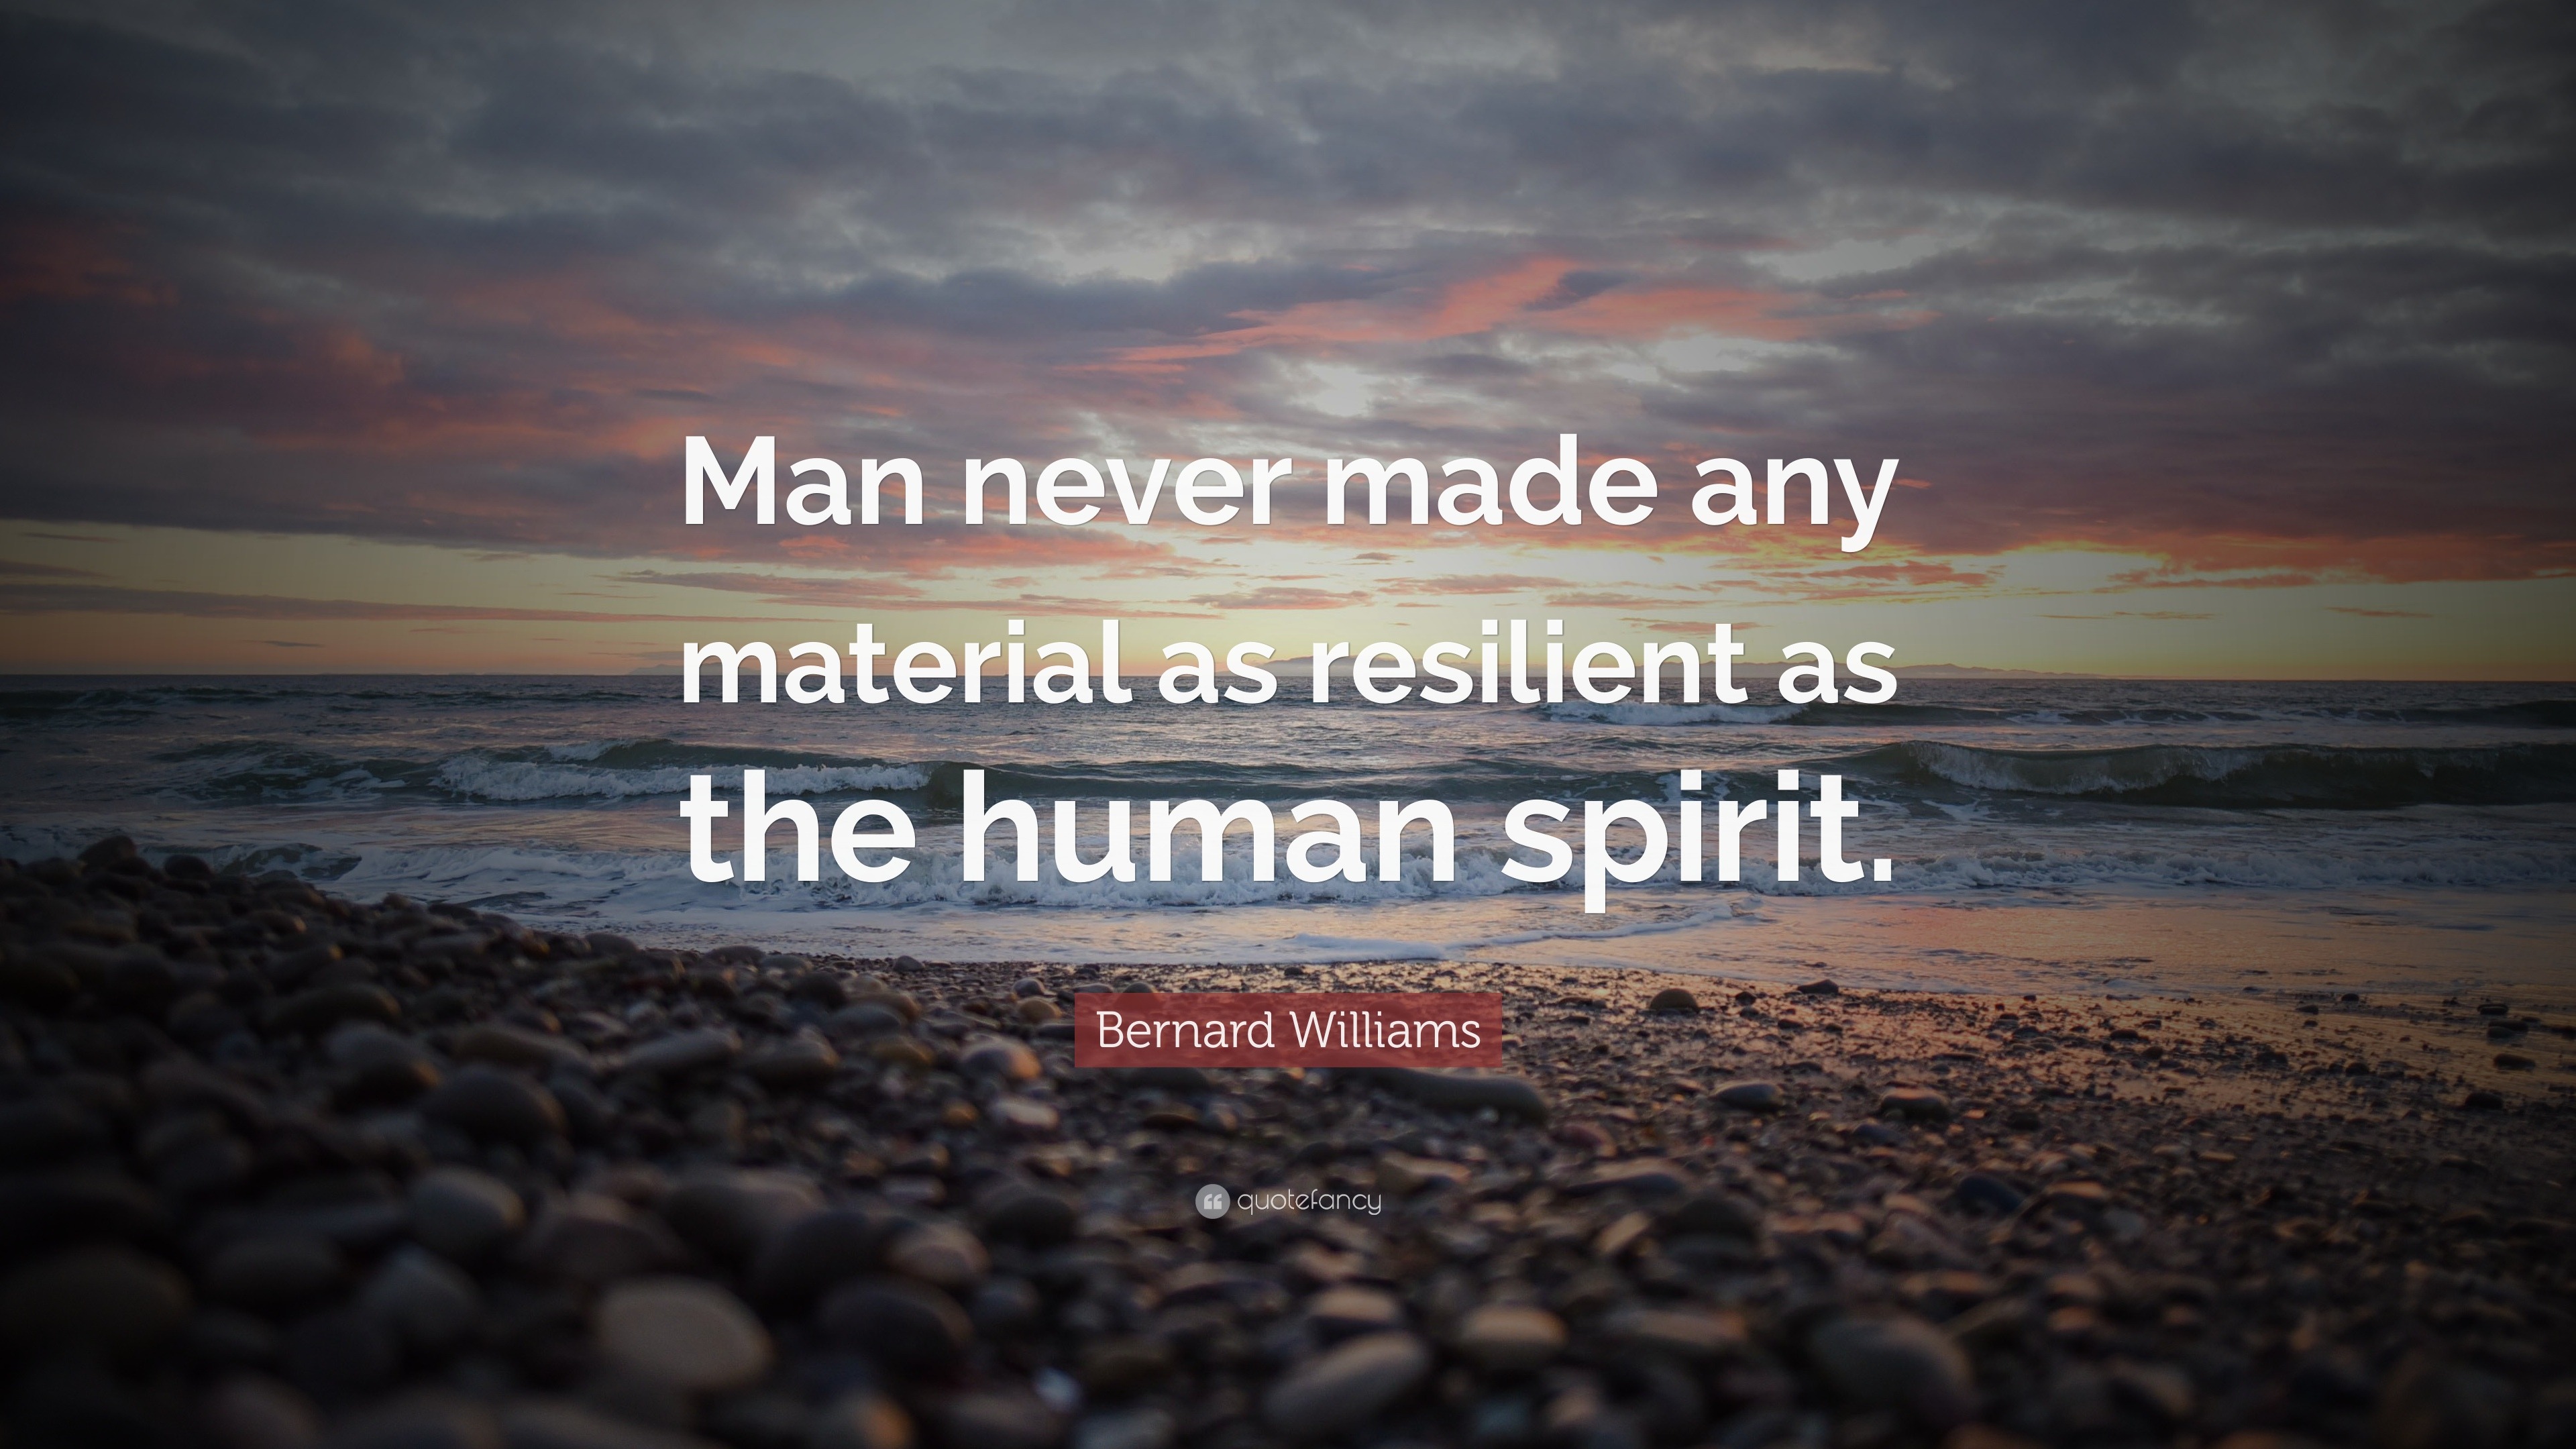 Bernard Williams Quote: “Man never made any material as resilient as